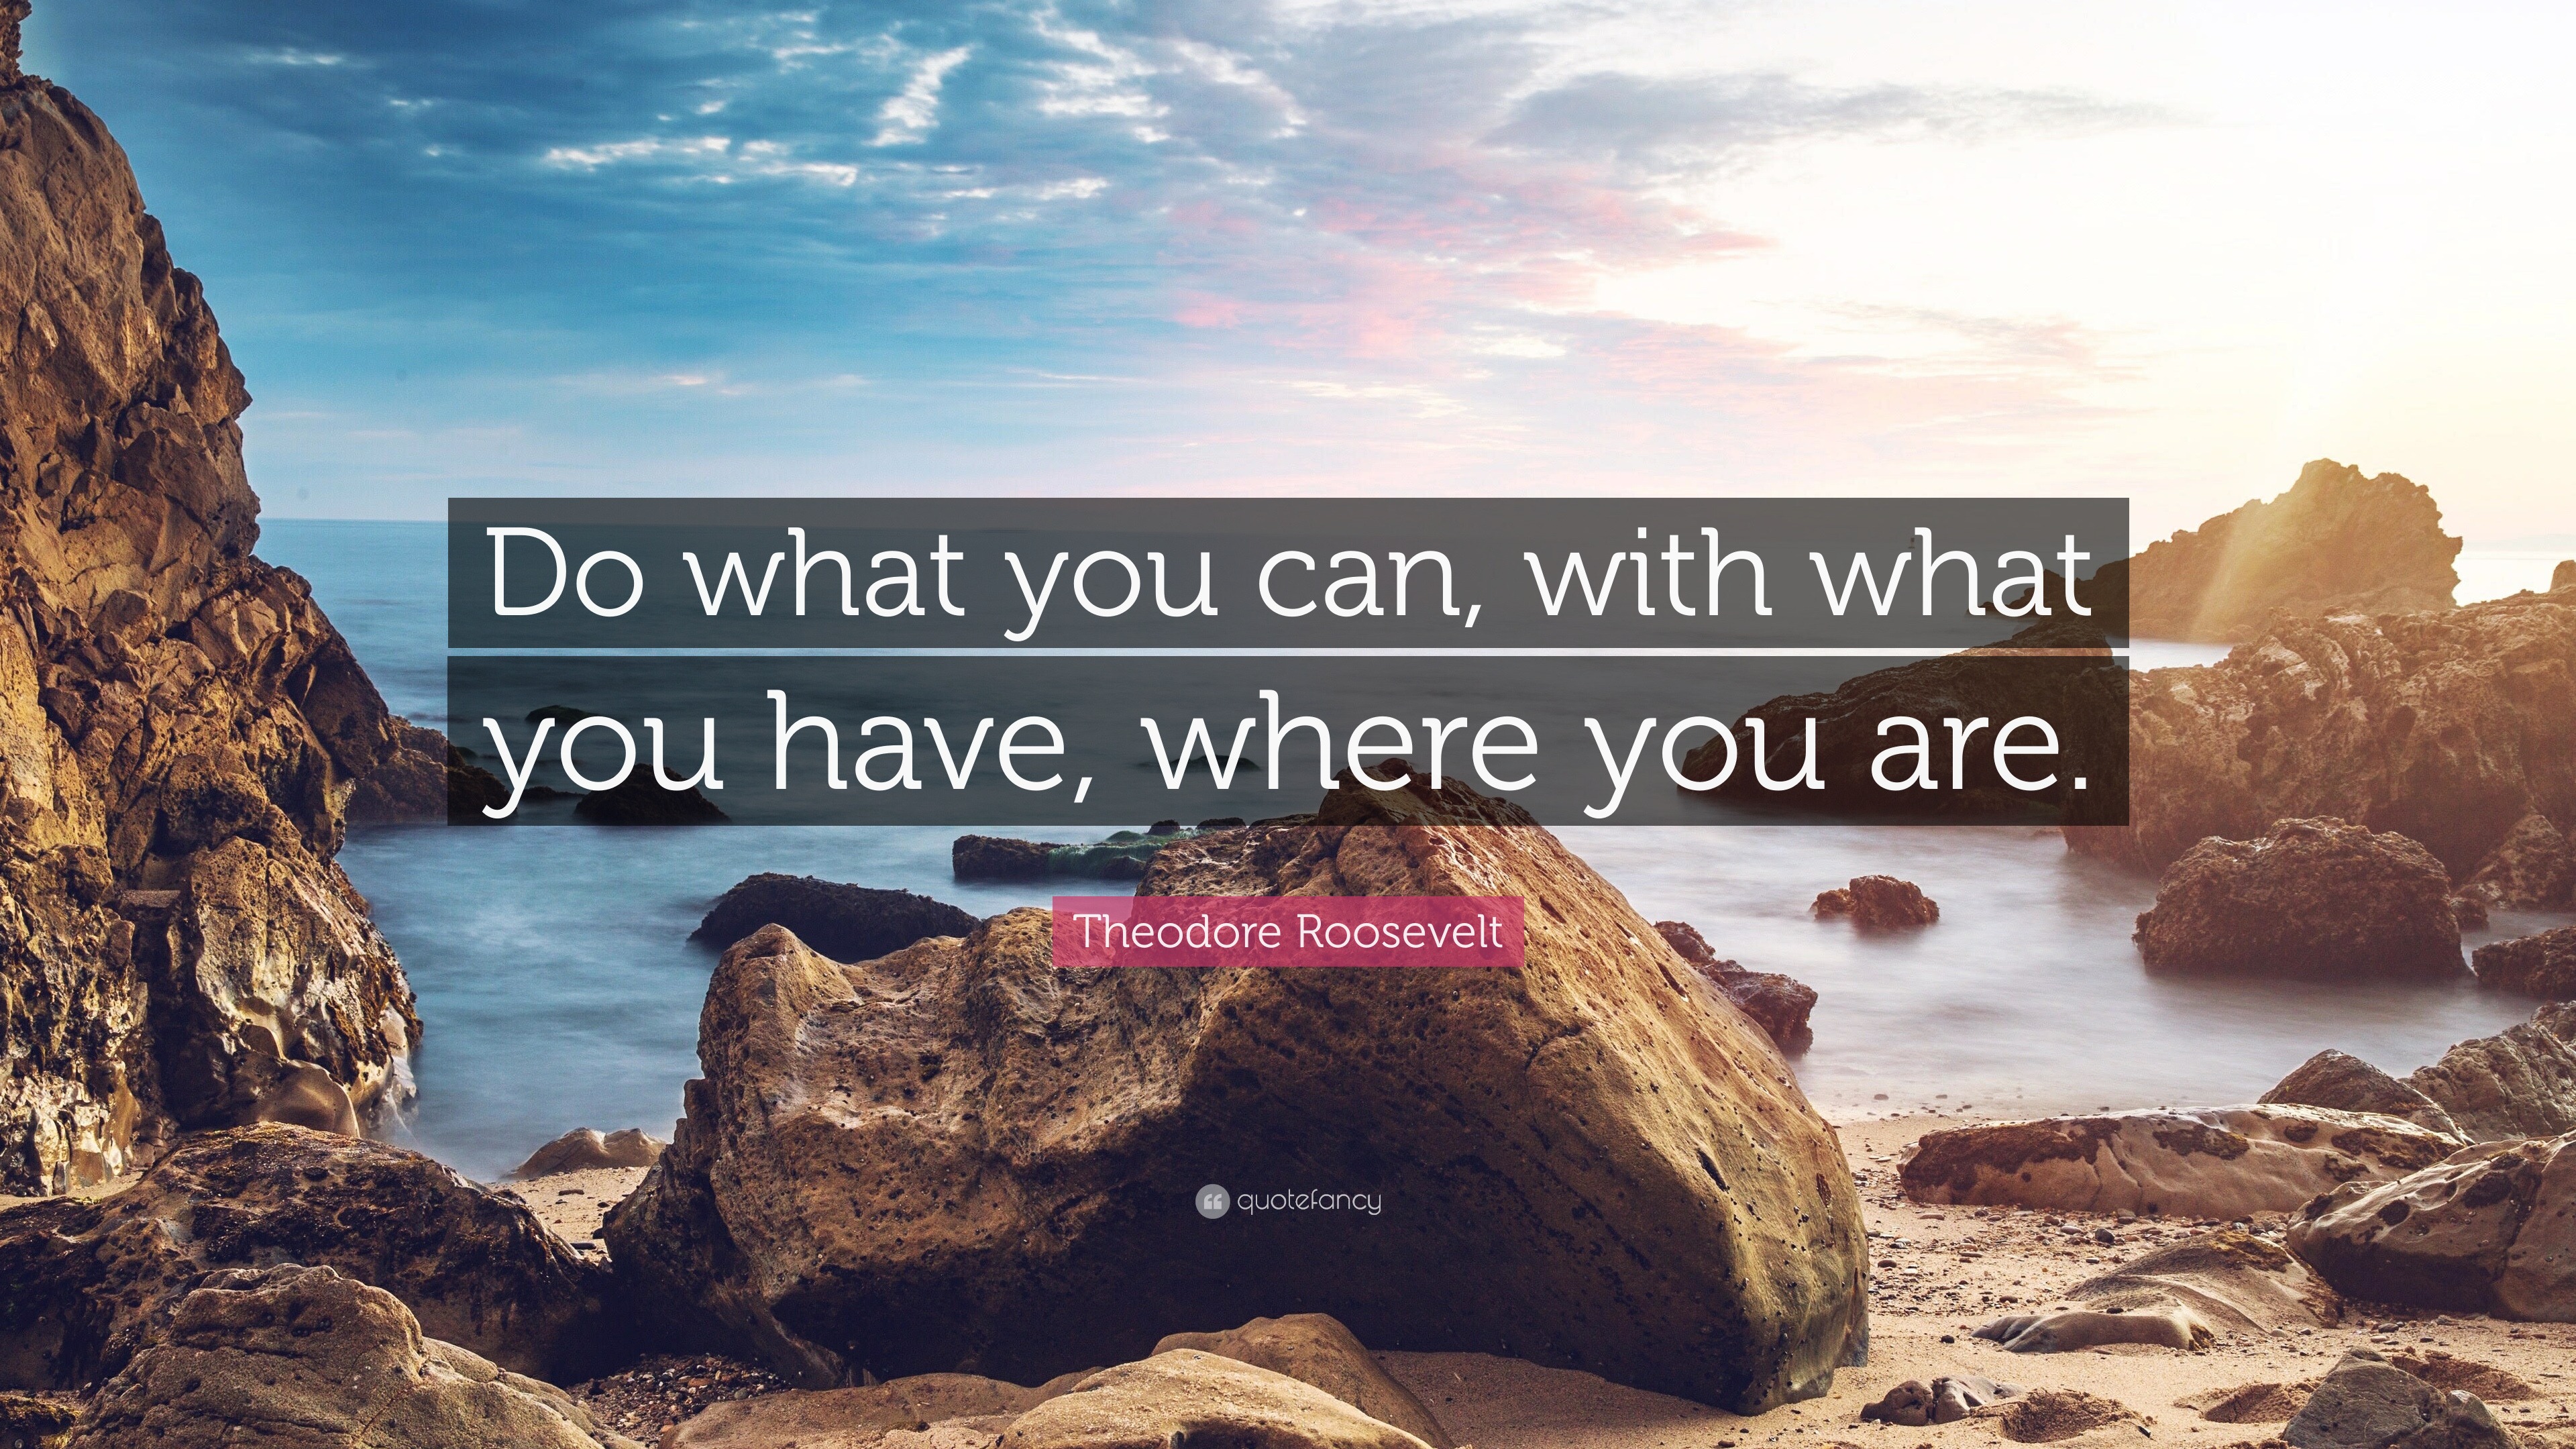 Theodore Roosevelt Quote Do What You Can With What You Have Where You Are